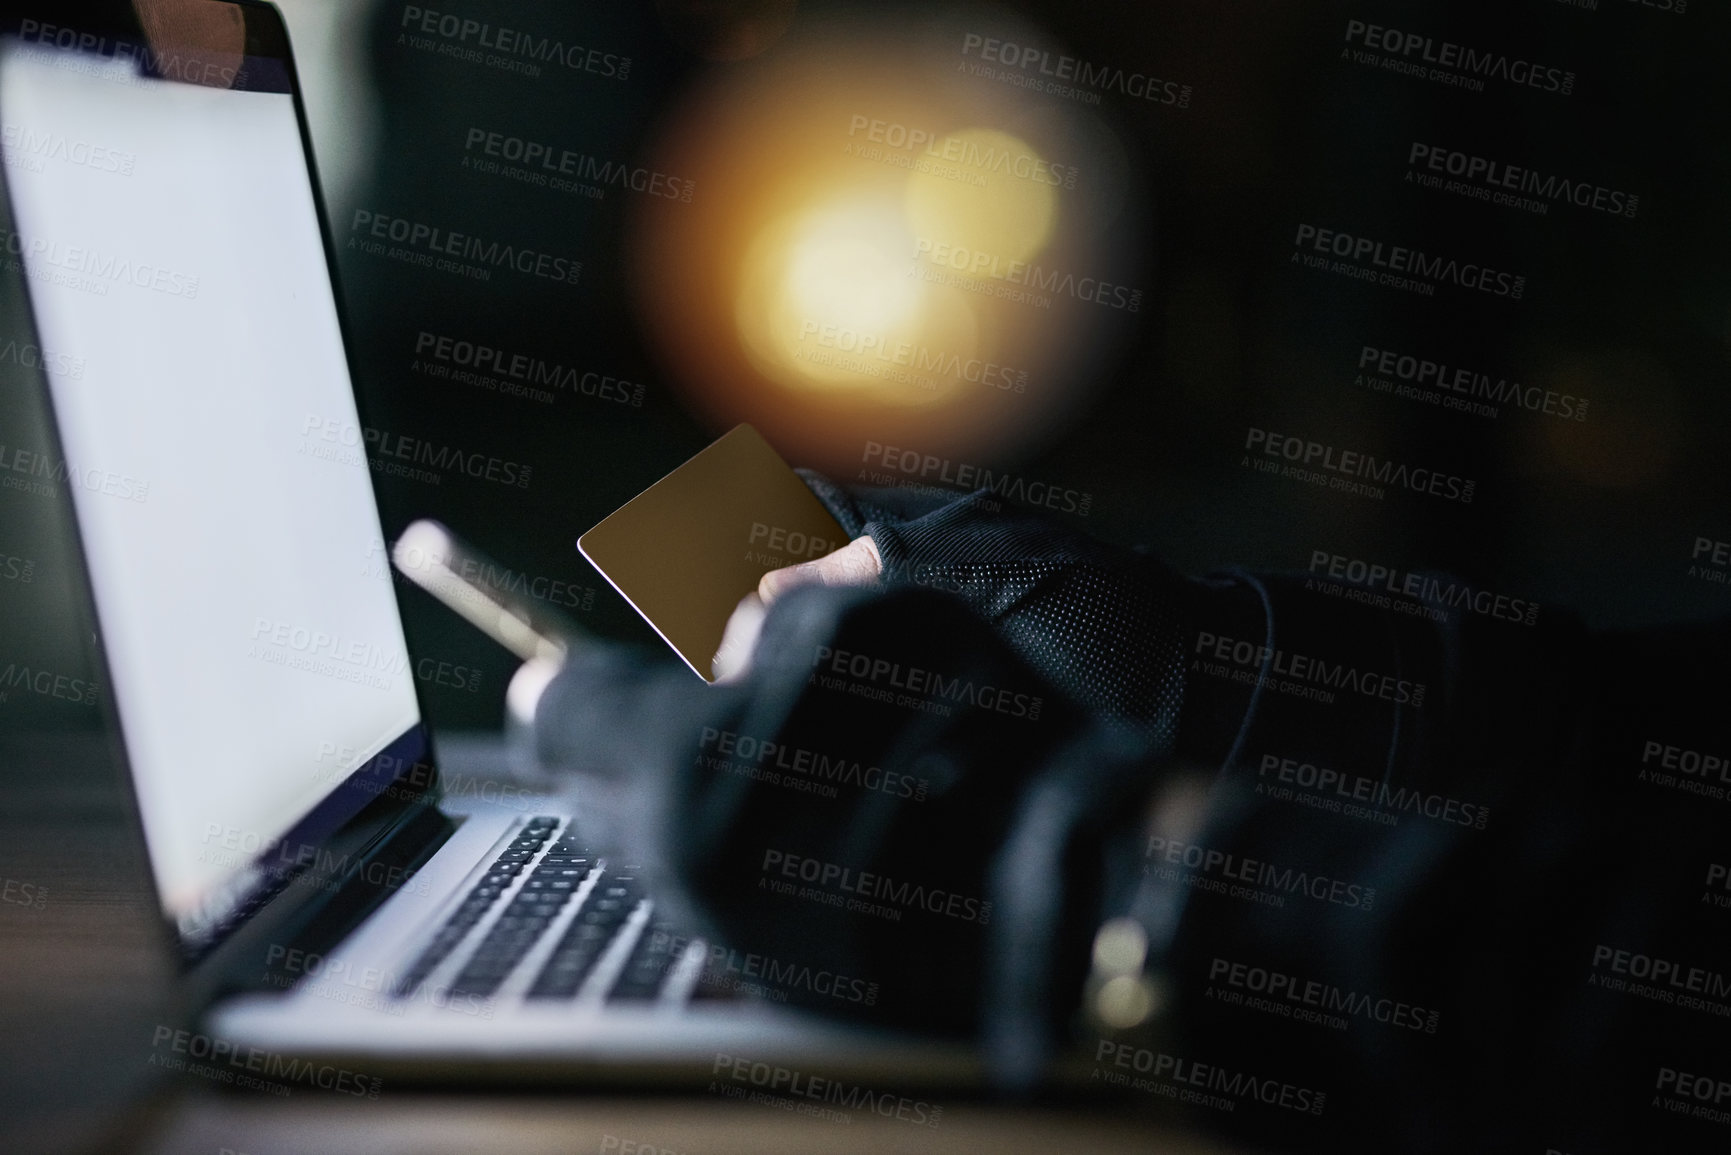 Buy stock photo Shot of an unidentifiable criminal using a laptop to hack into a credit account